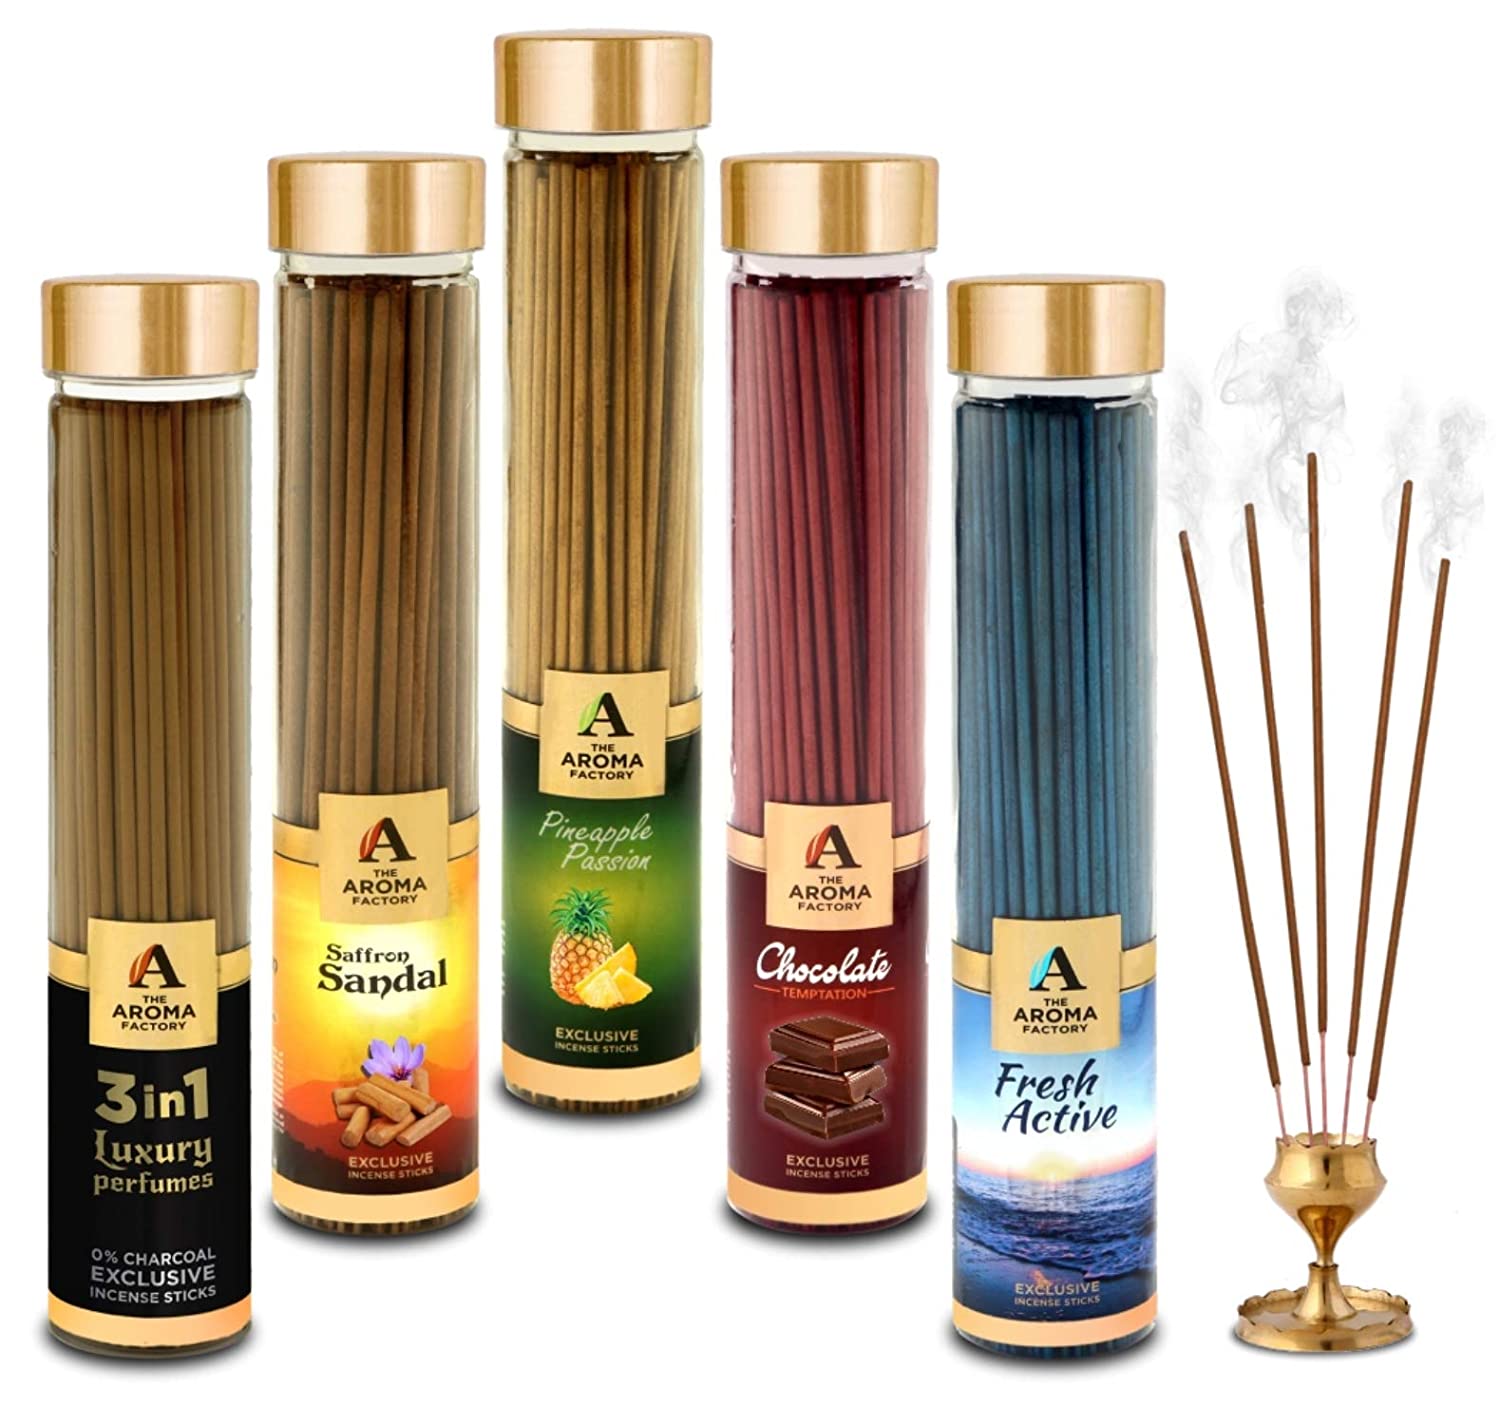 The Aroma Factory Kesar Chandan, 3 in 1, Attar Jannat, Patchouli & Fresh Active Incense Stick Agarbatti (Zero Charcoal & 100% Herbal) Bottle Pack of 5 x 100